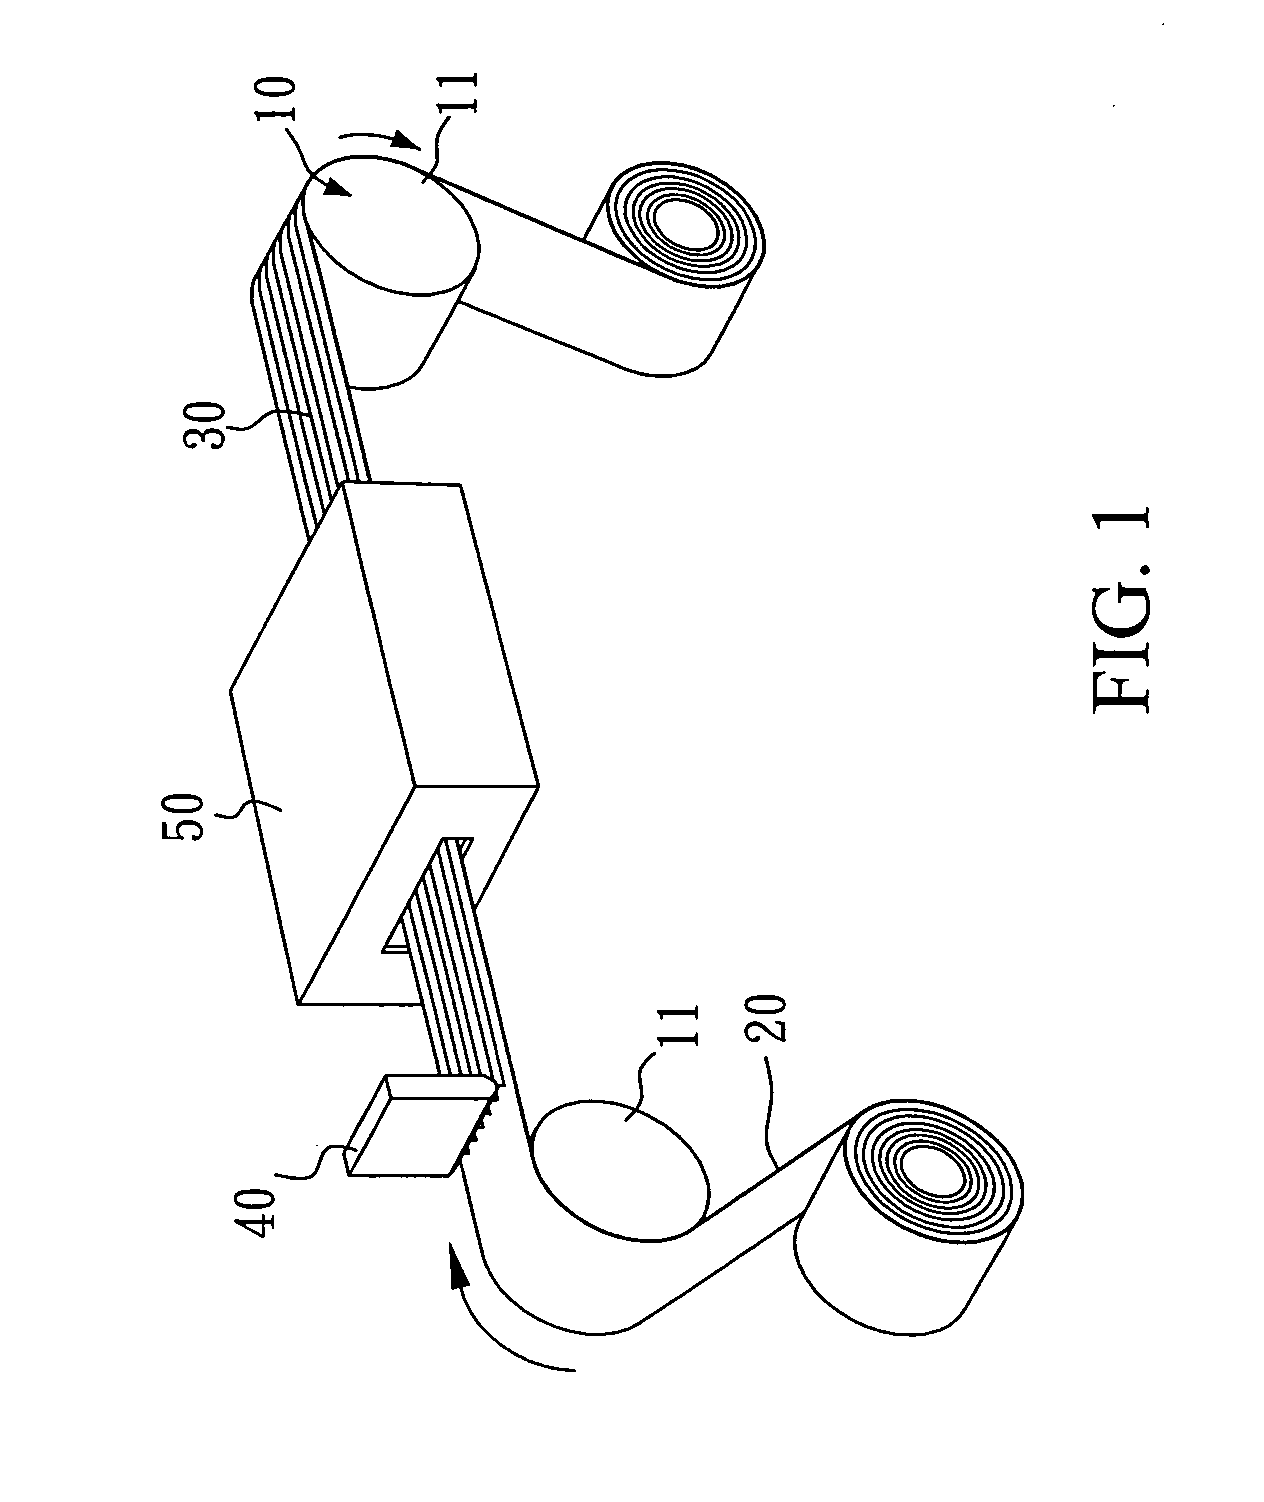 Roll-to-roll process for fabricating passive matrix plastic displays